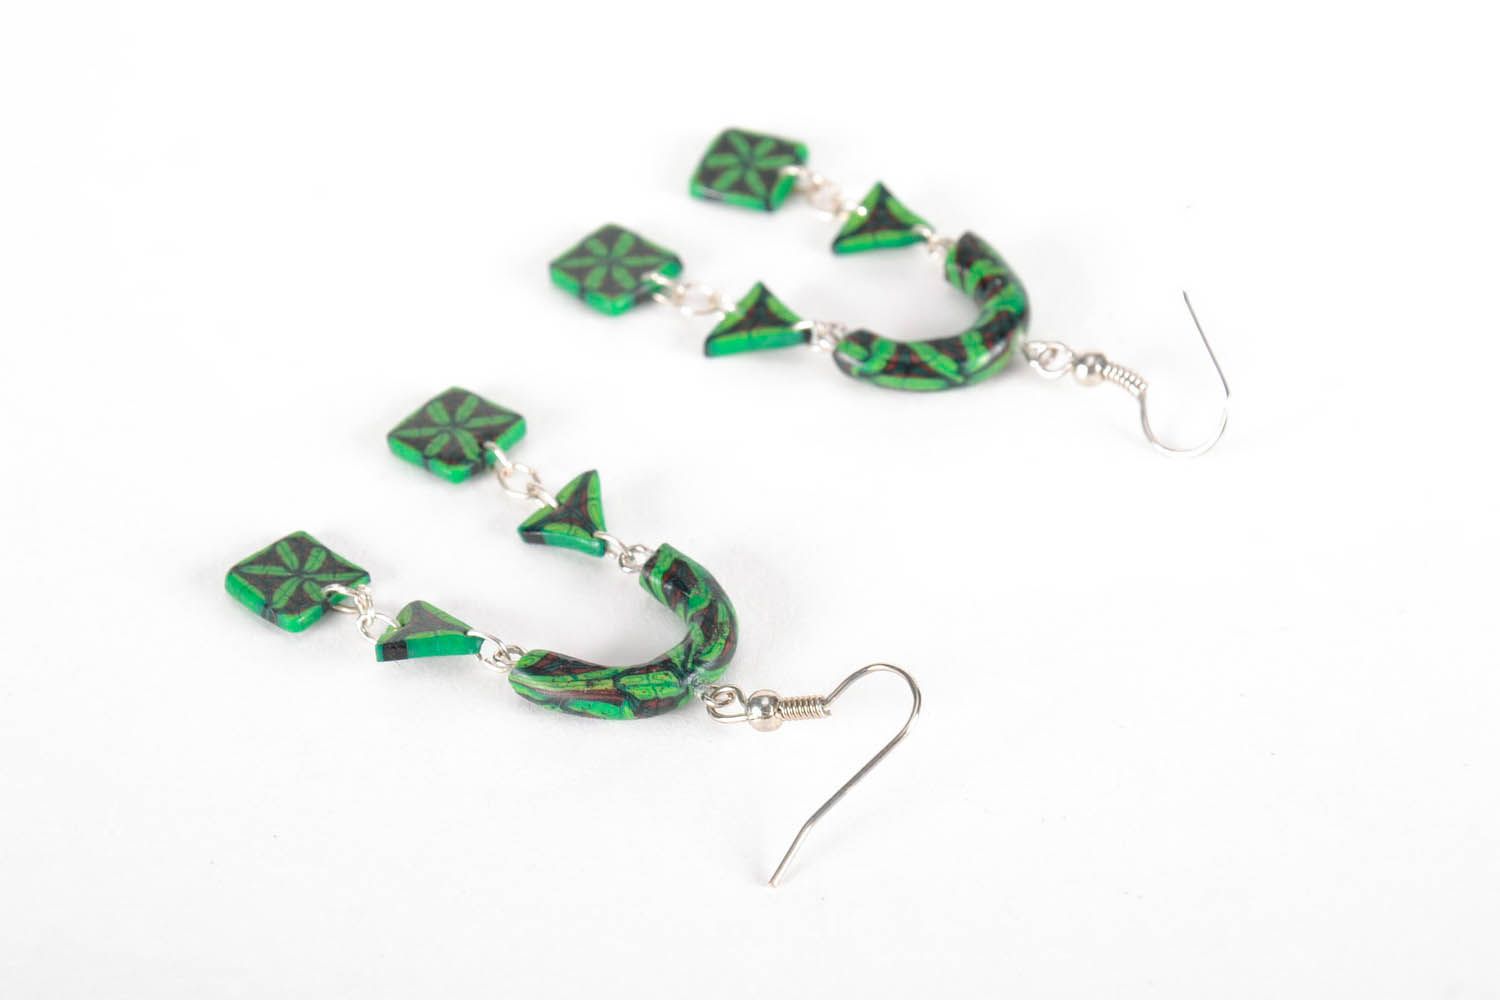 Long earrings made of polymer clay photo 2